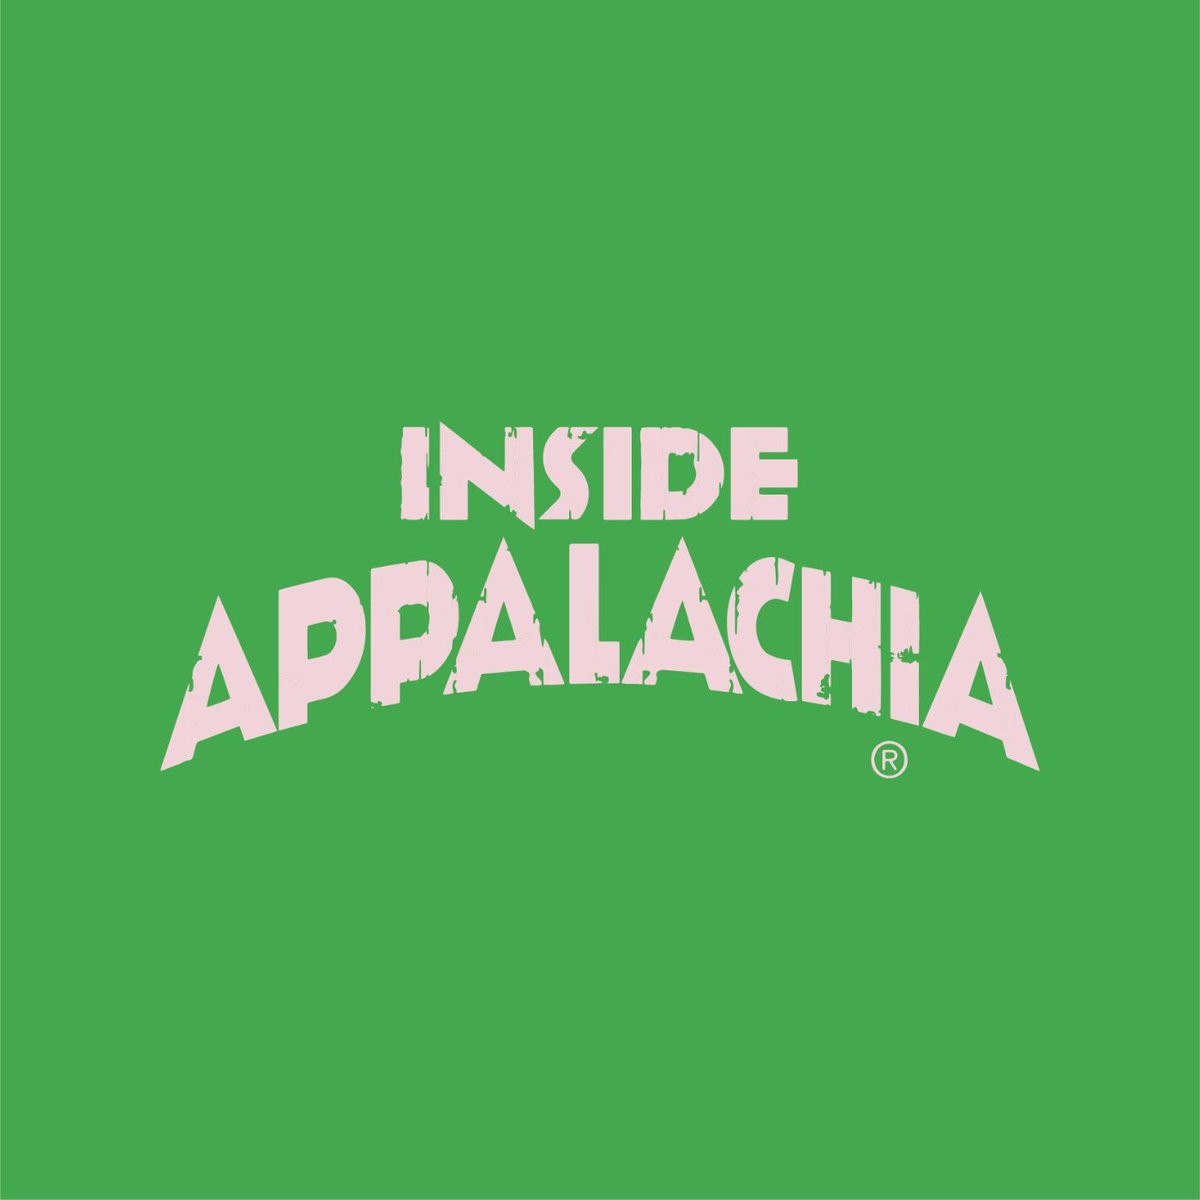 This week on #InsideAppalachia 🌄, we learn about a century old formal dance at the KY Mountain Laurel Festival. We also learn about a family's difficult year following a denied abortion, and we talk w/professor and poet Sarah Henning. 🎧 Listen SUNDAY at 7AM & 6PM on @wvpublic.